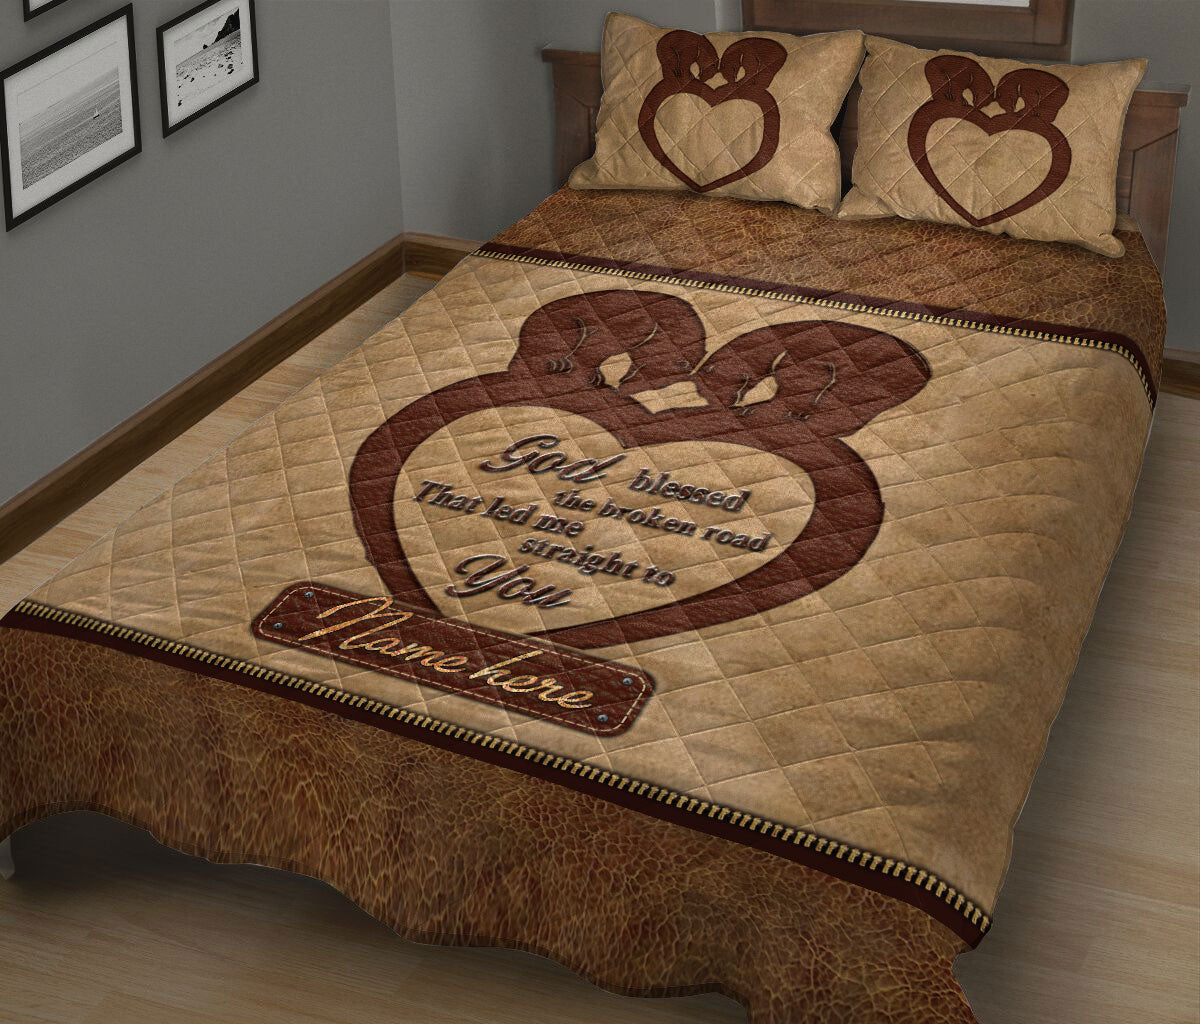 Ohaprints-Quilt-Bed-Set-Pillowcase-Wild-Animal-Bear-Couple-God-Bless-Brown-Valentine-Custom-Personalized-Name-Blanket-Bedspread-Bedding-2570-King (90'' x 100'')